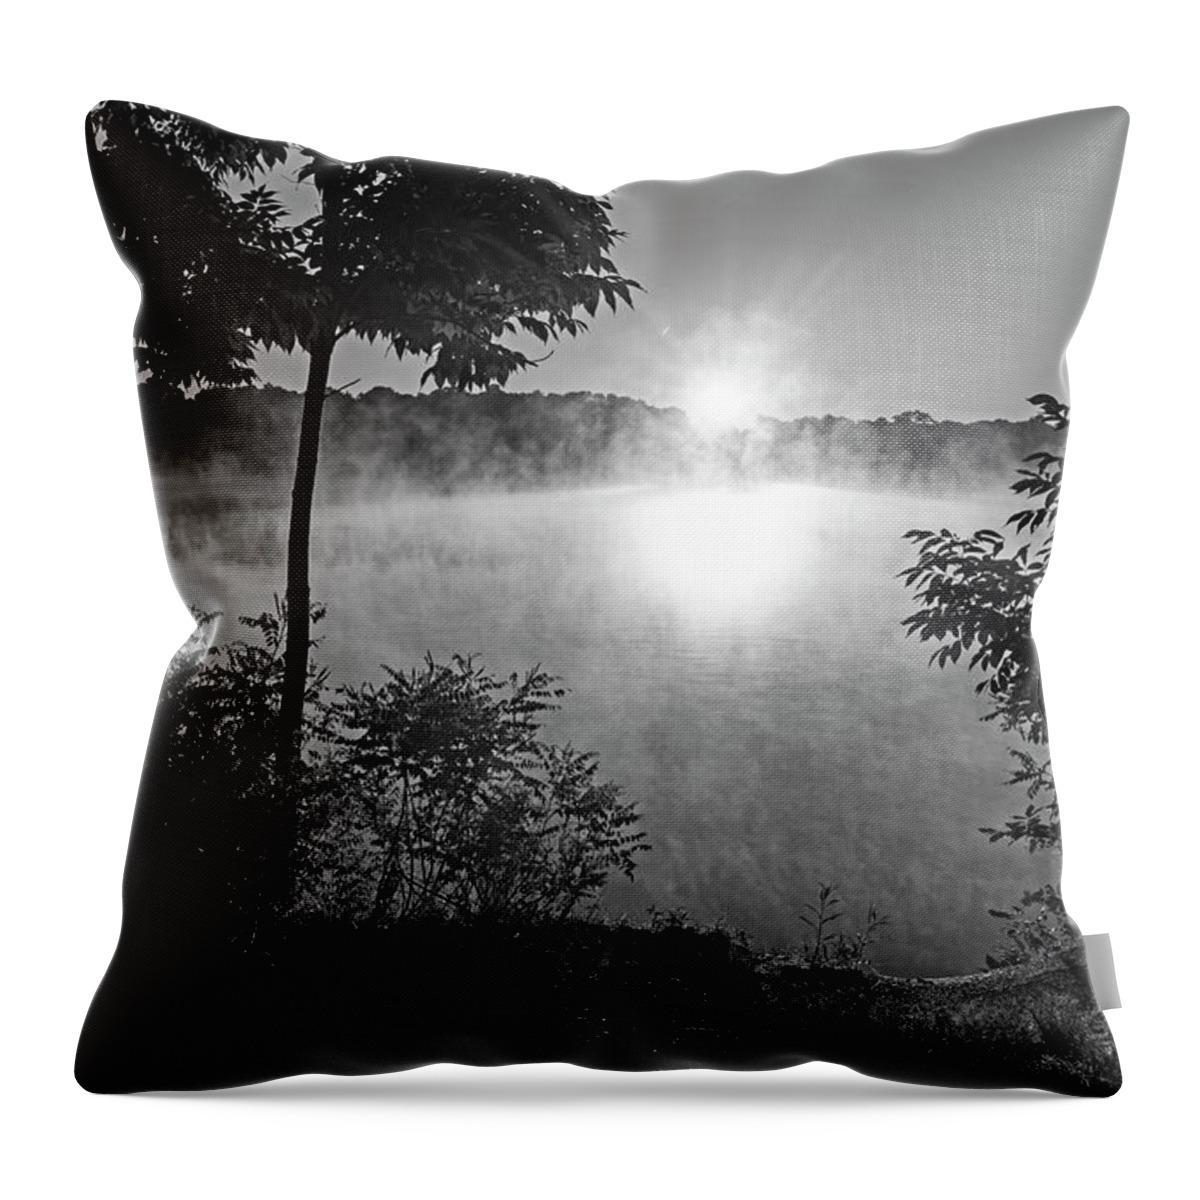 Woburn Throw Pillow featuring the photograph Horn Pond Sunrise in Woburn Massachusetts Mist Black and White by Toby McGuire